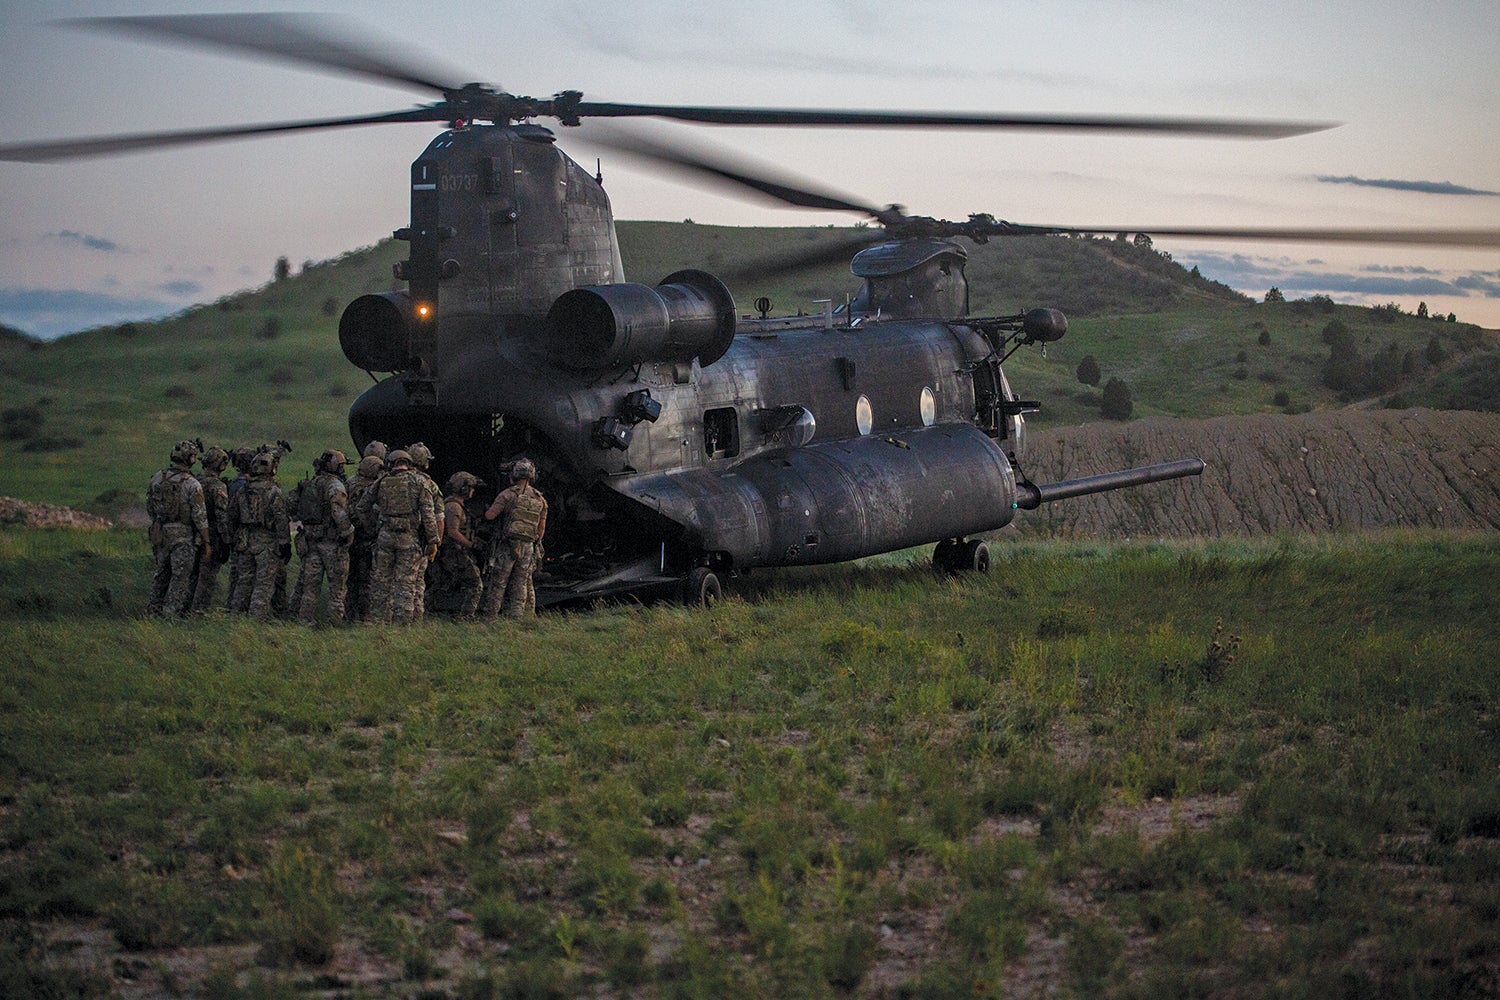 Soldiers from the 10th Special Forces Group (Airborne) prepare to train with crews from the 160th Special Operations Aviation Regiment (Airborne)at Fort Carson, Colorado. (Credit: U.S. Army/Sgt. Isaih Vega)